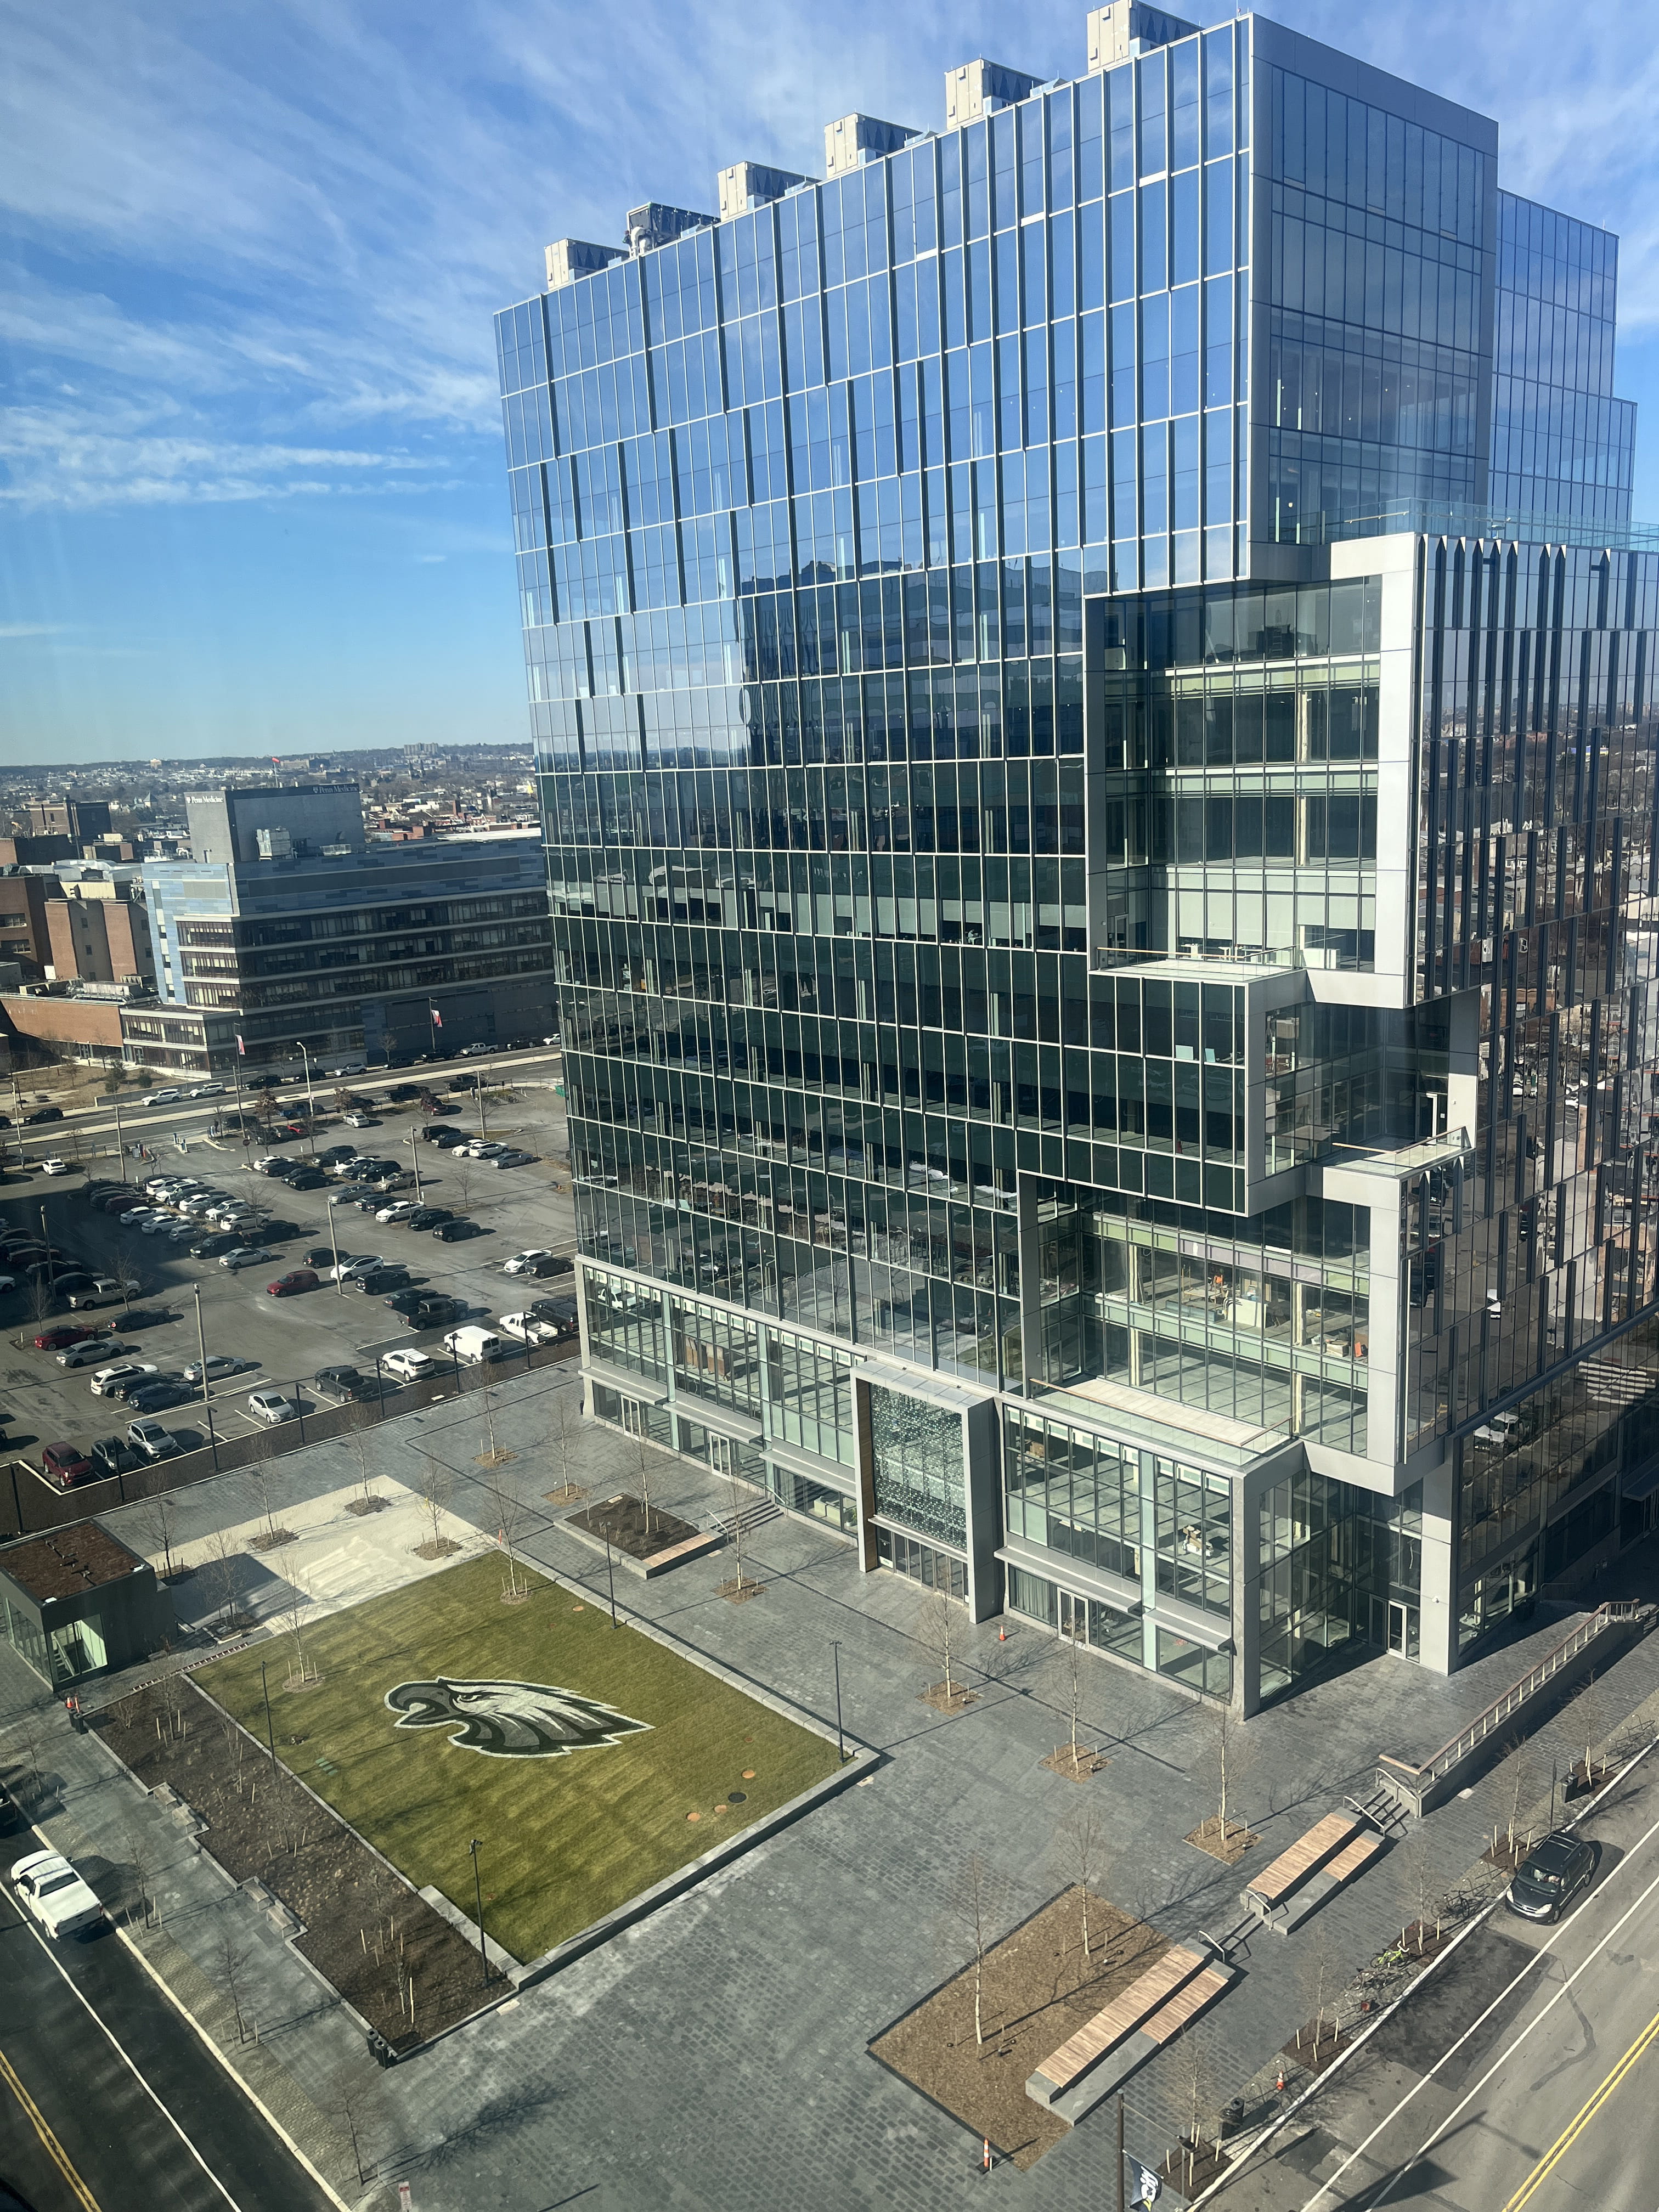 The view from the 11th story of Drexel's Health Sciences Building on the University City Campus.